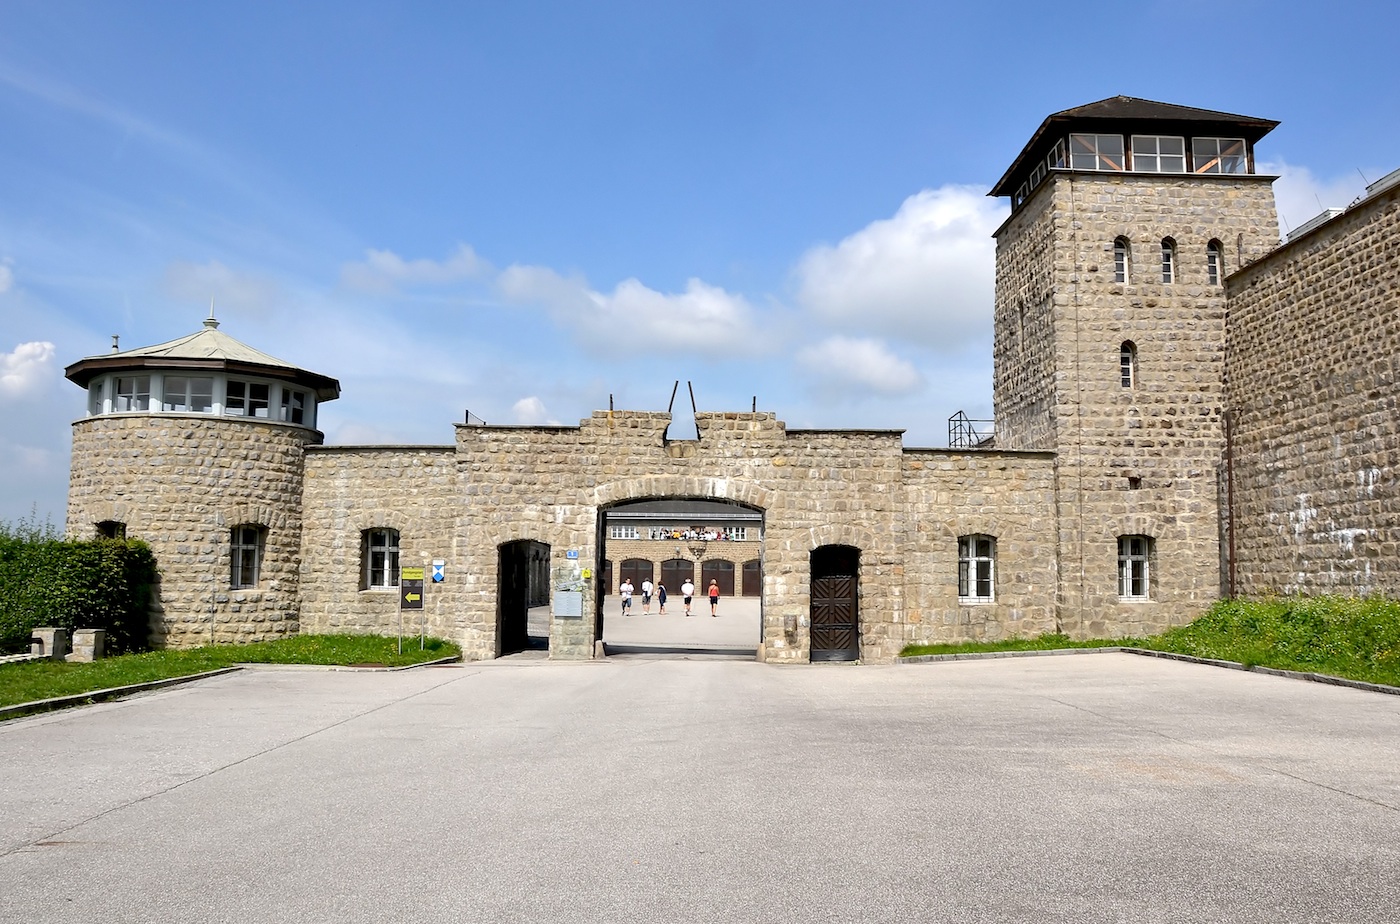 Mauthausen Concentration Camp Memorial Day-Trip from Vienna - 8,5 hours - Vienna à la carte ...